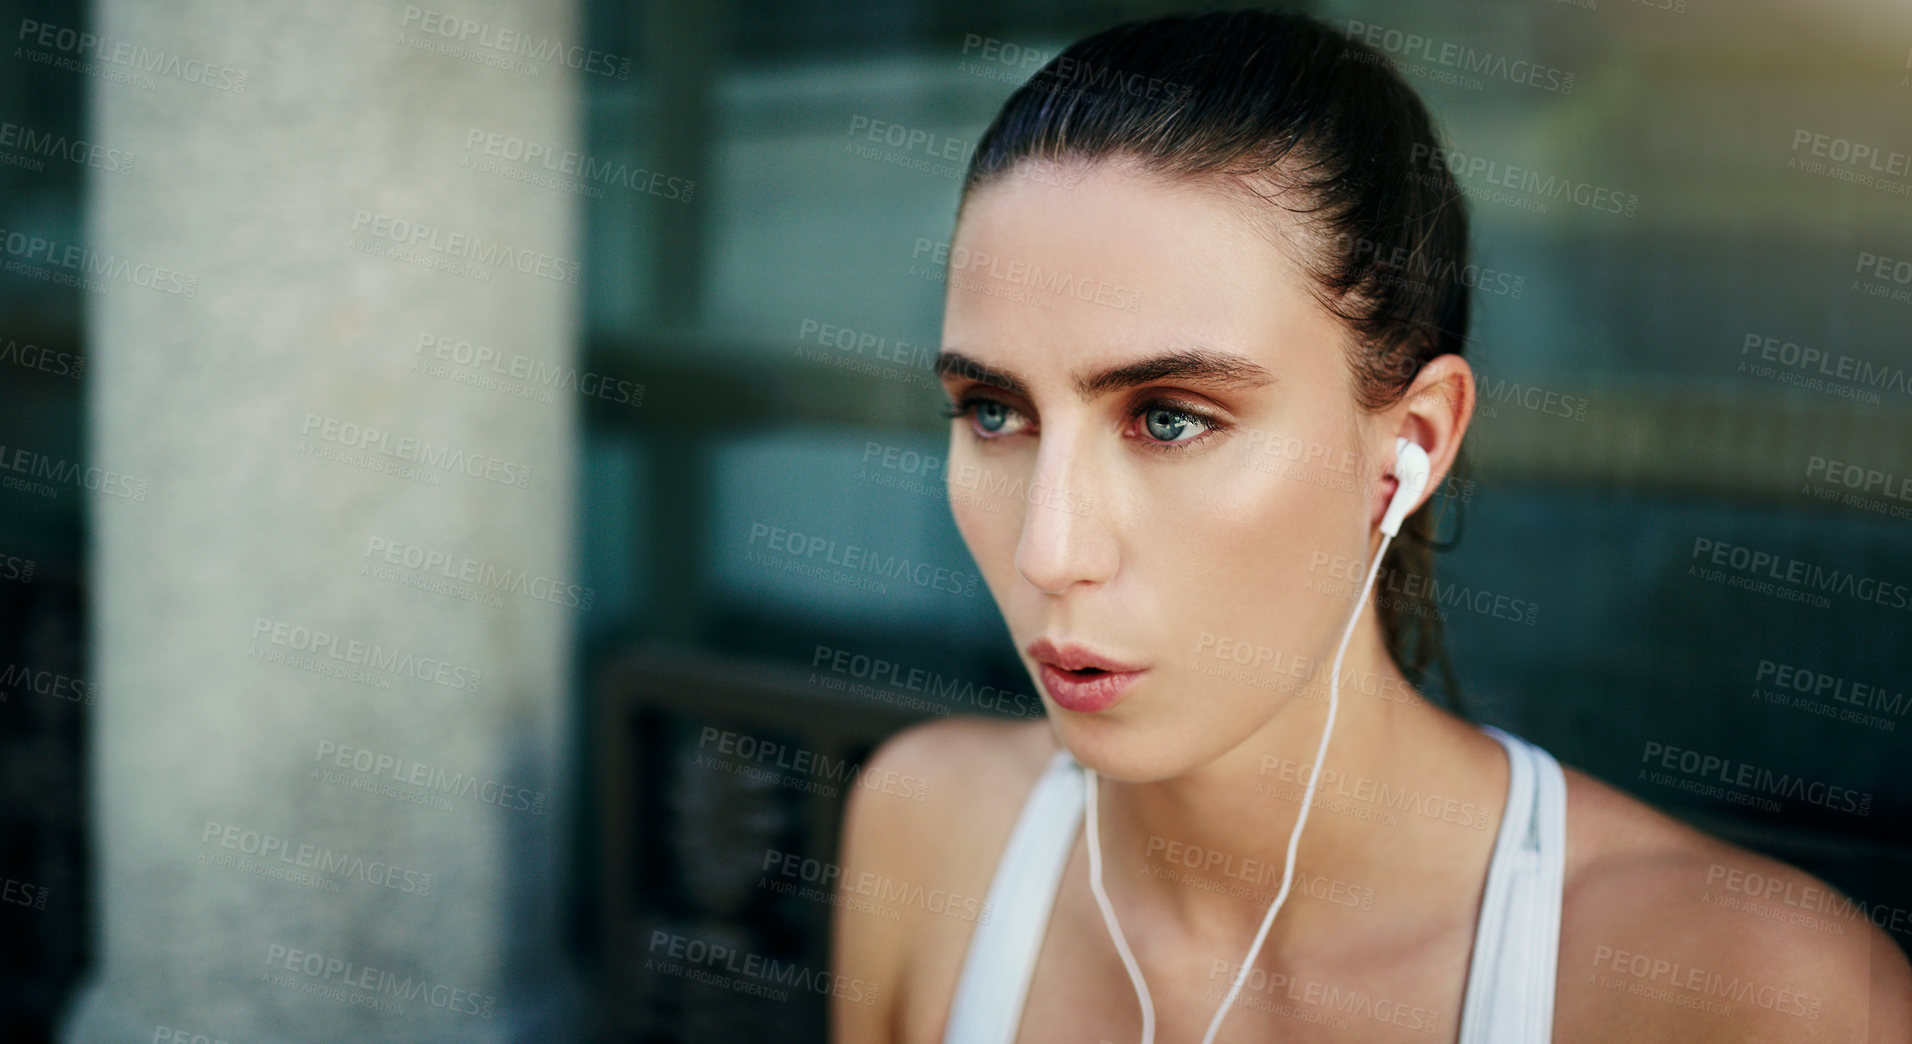 Buy stock photo Shot of a young woman listening to music during her workout in the city